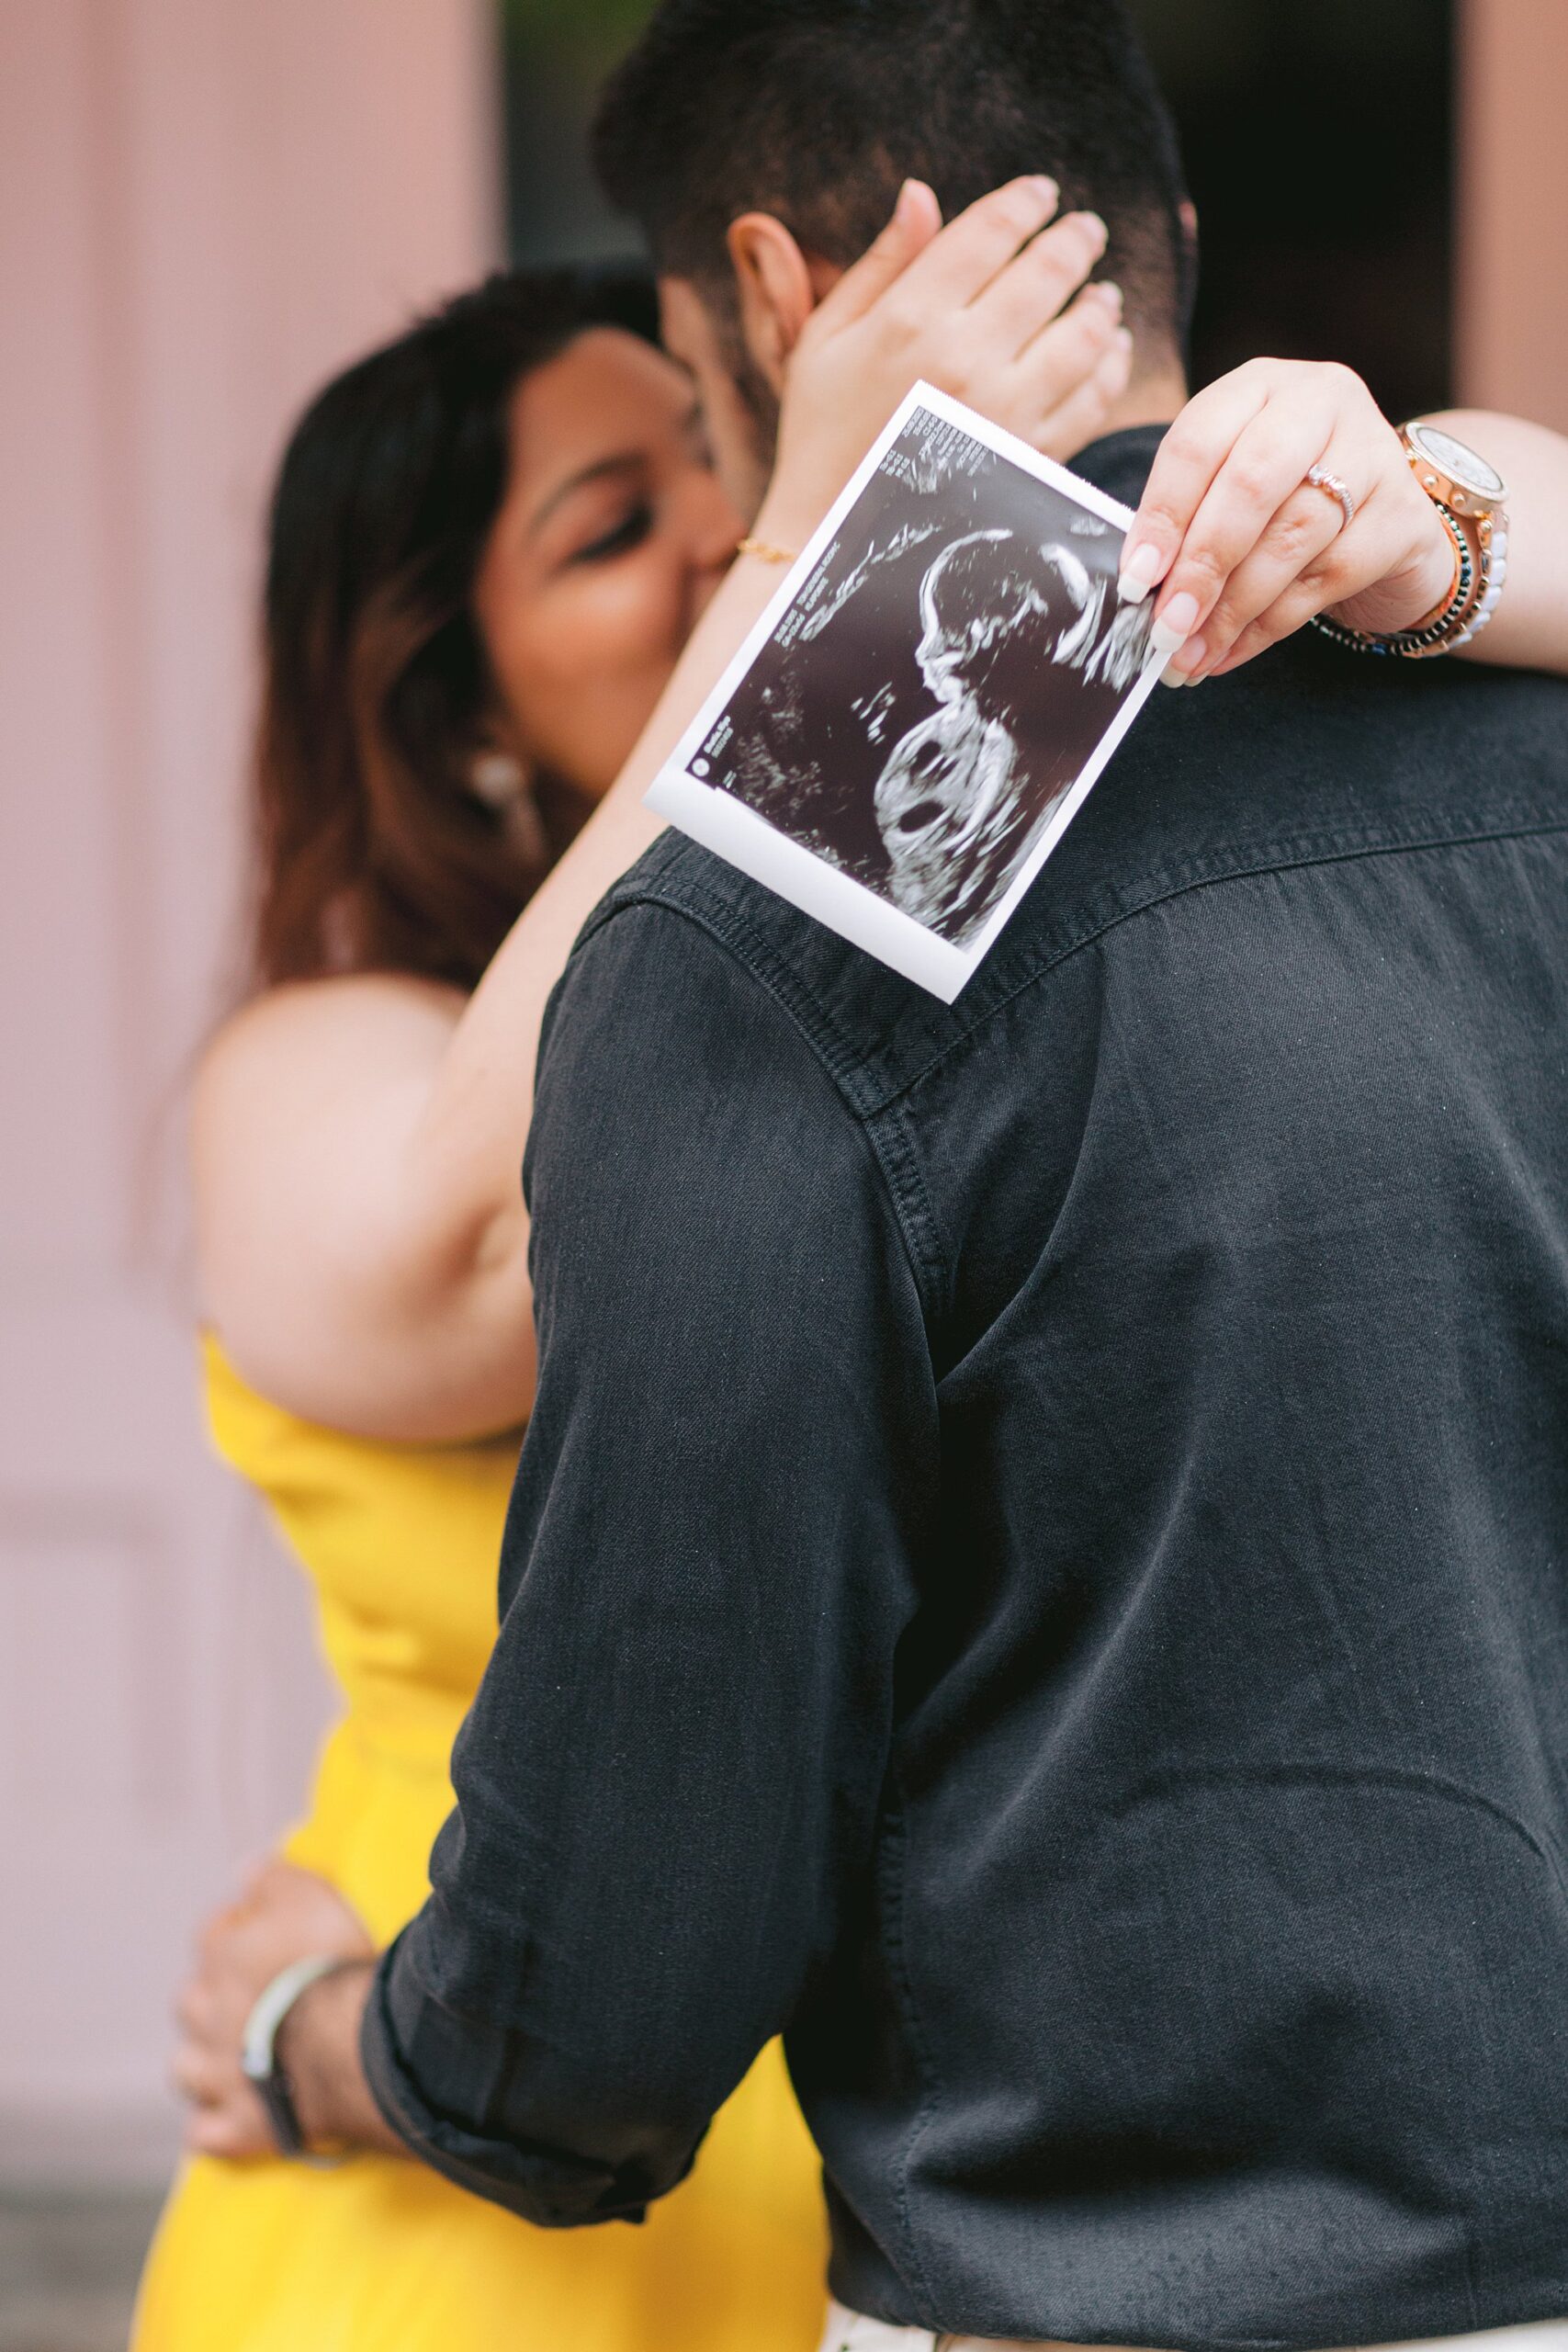 Candid moments of love and anticipation documented in a maternity shoot amid the timeless charm of Old Port, Montreal.